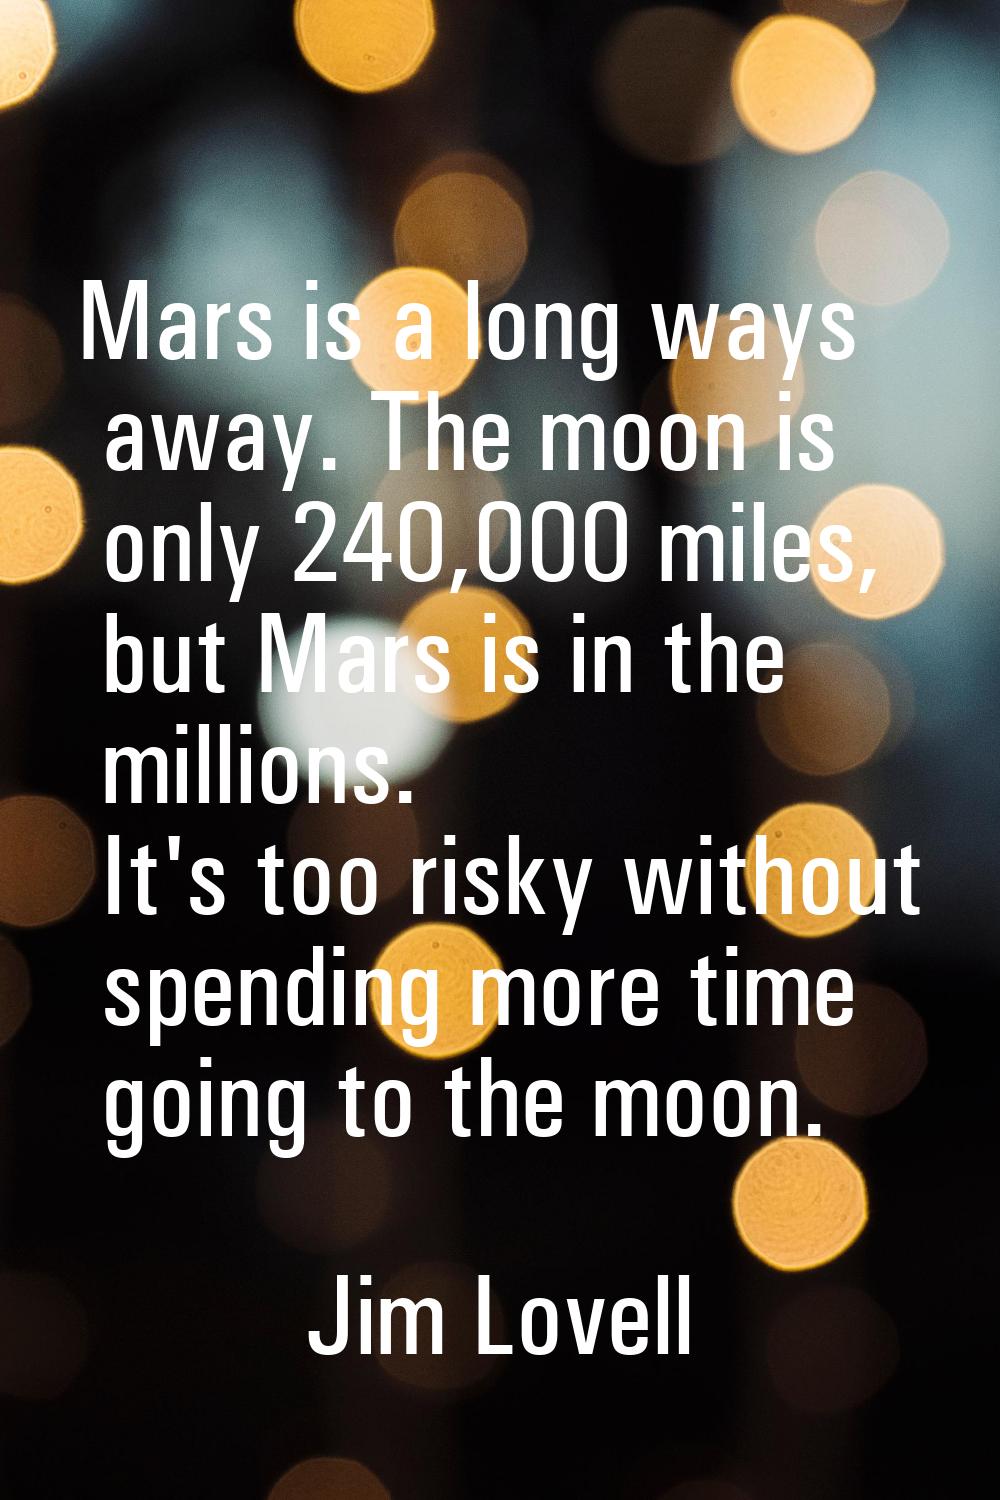 Mars is a long ways away. The moon is only 240,000 miles, but Mars is in the millions. It's too ris